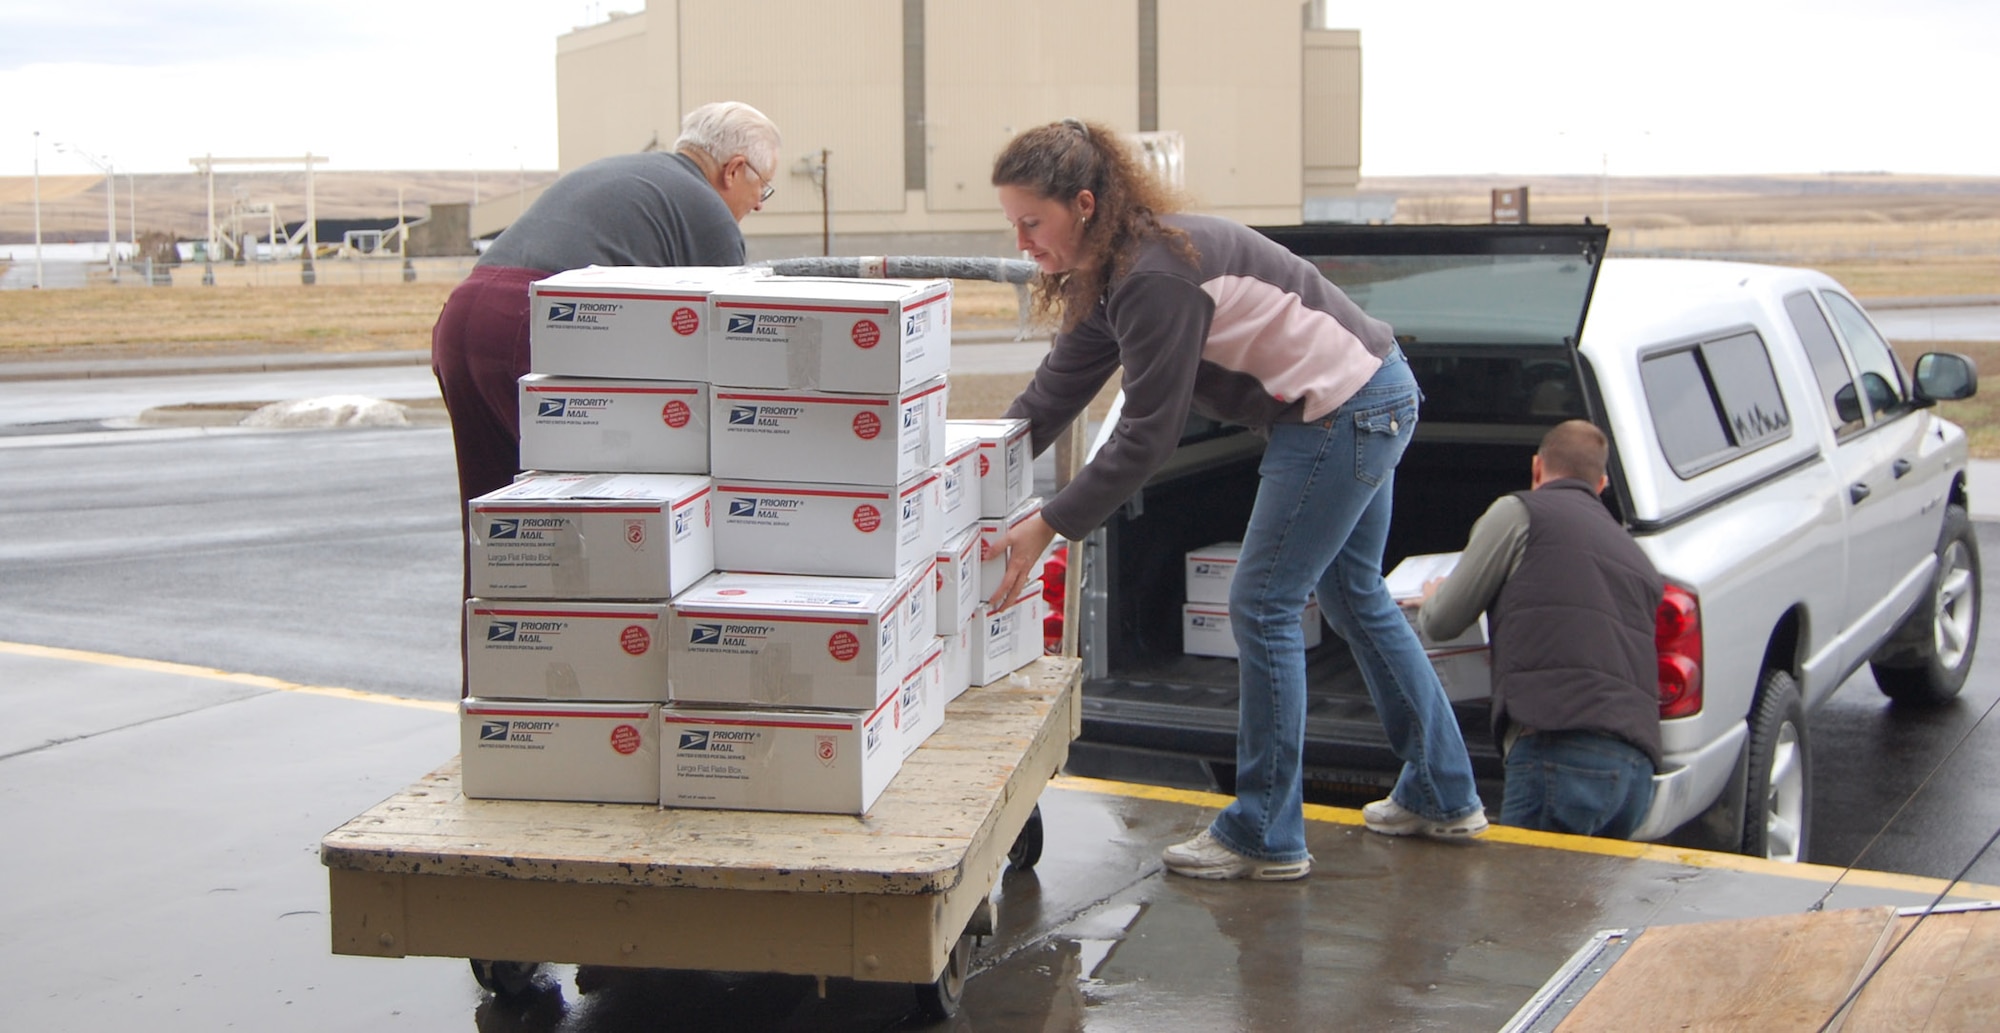 Steve Kubick, retiree, and Tech. Sgt. Tonya Shiffert, 341st Logistics Readiness Squadron, help load the first batch of packed boxes into a truck for transport to the post office Dec. 6. Volunteers packed 200 boxes to be shipped to deployed servicemembers from Montana. (U.S. Air Force photo/Valerie Mullett)